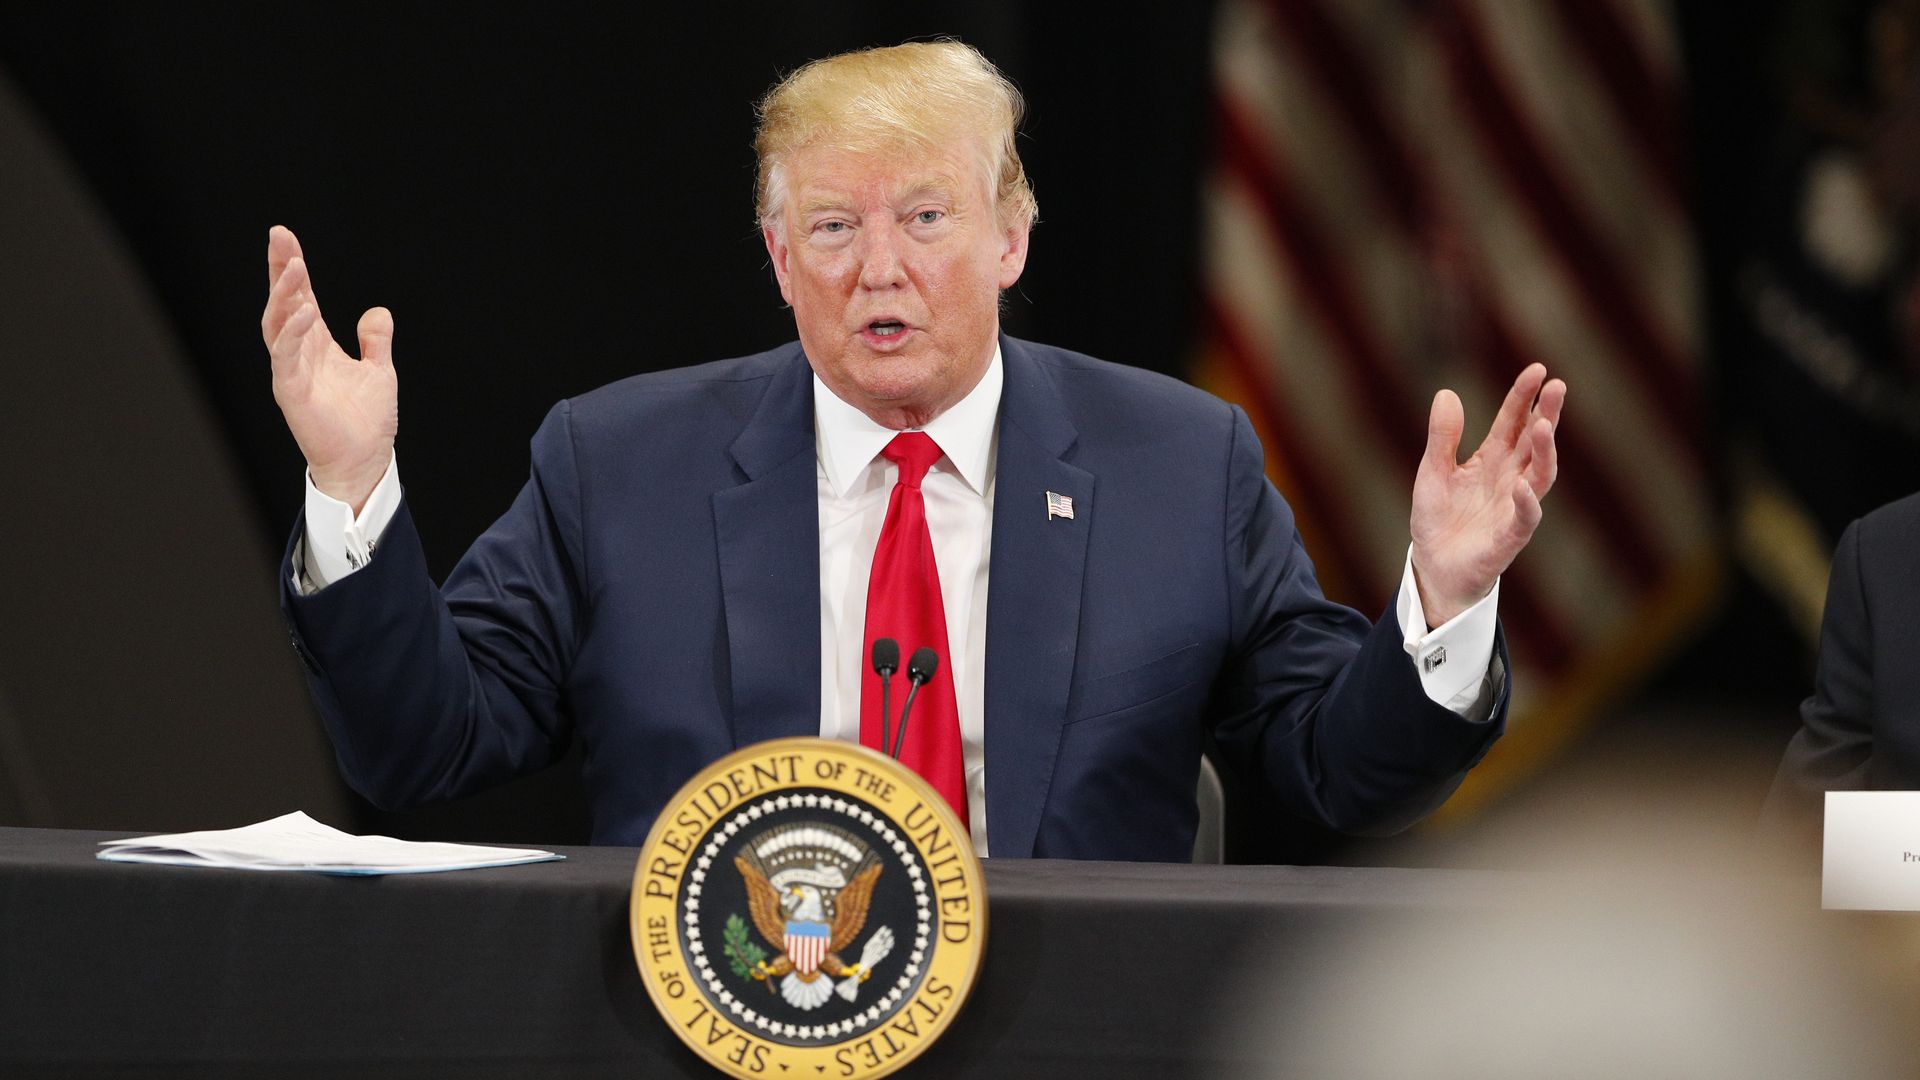  President Trump says he's opposed to White House aides providing testimony to congressional panels in the wake of the Mueller report.